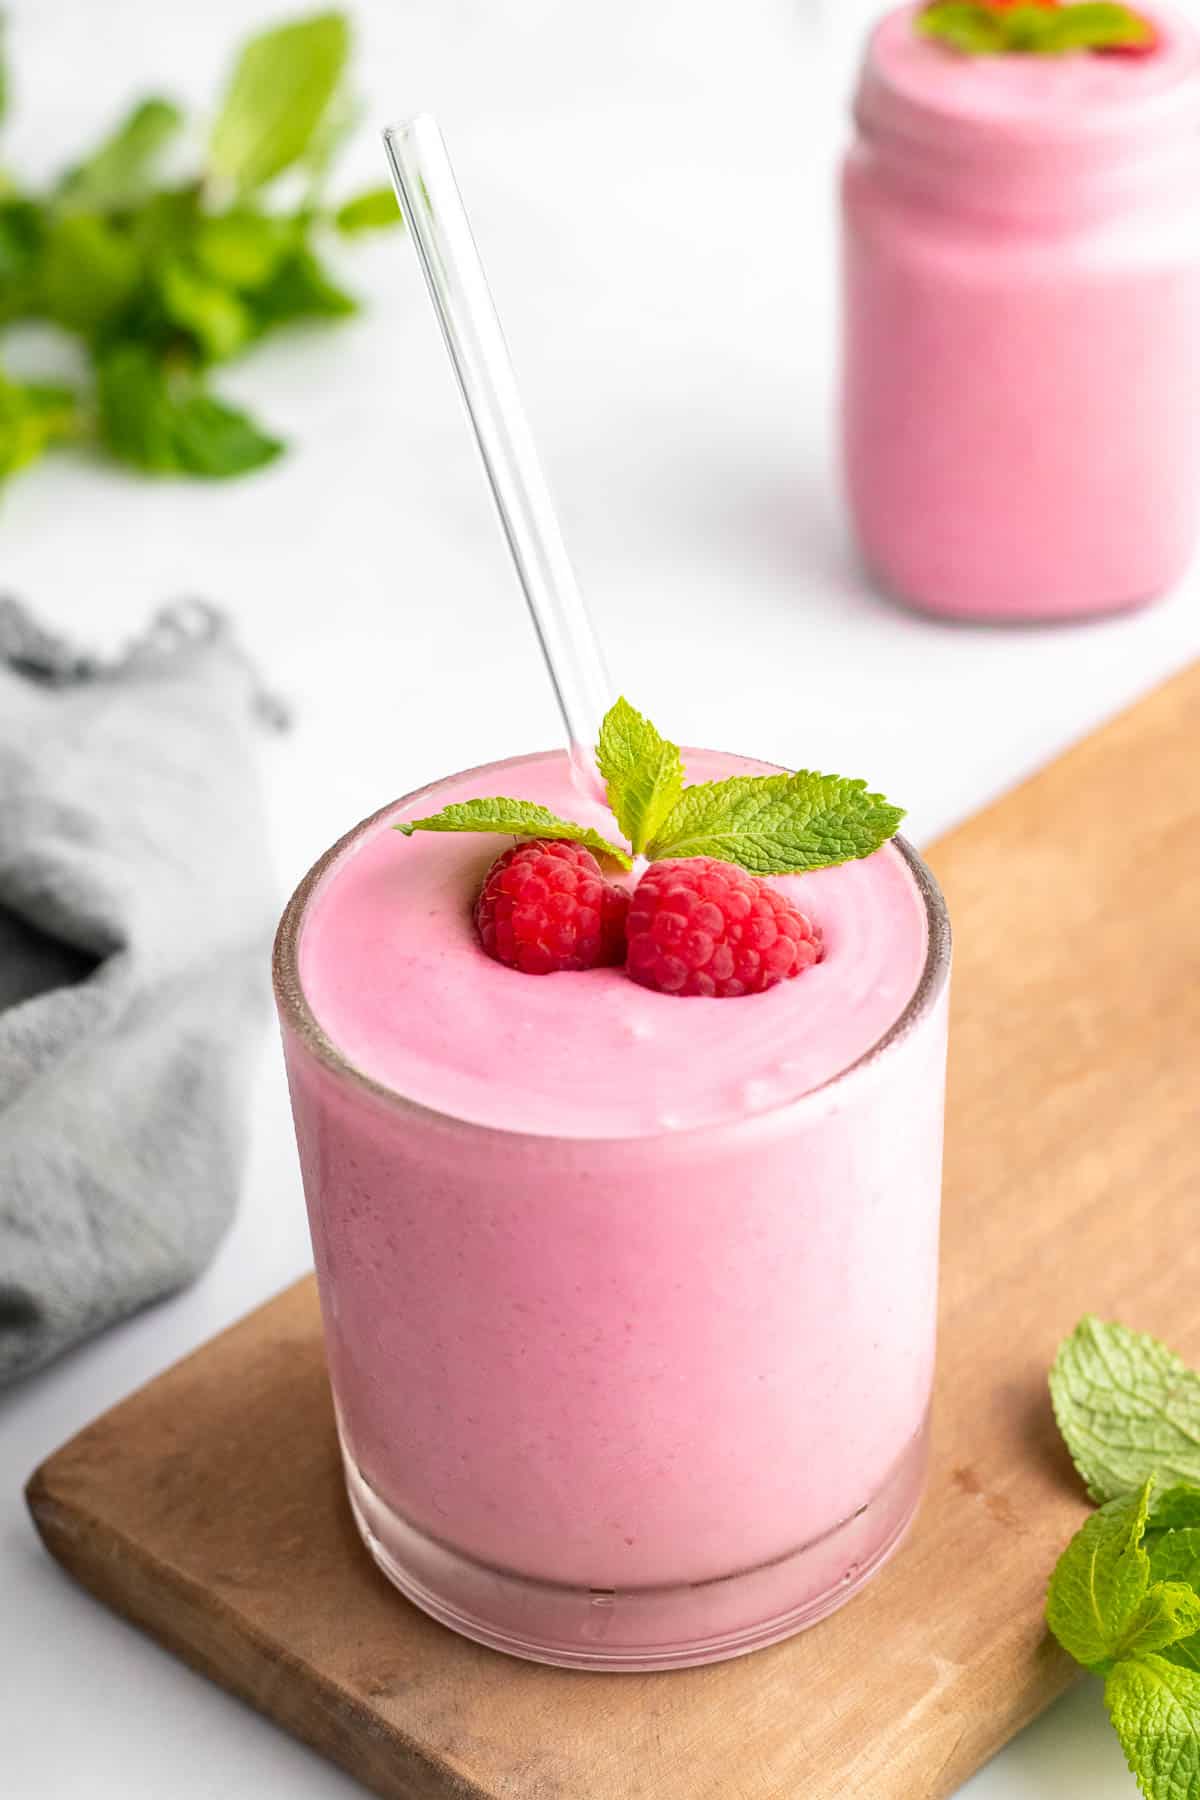 Smoothie in glass with straw, topped with fresh raspberries